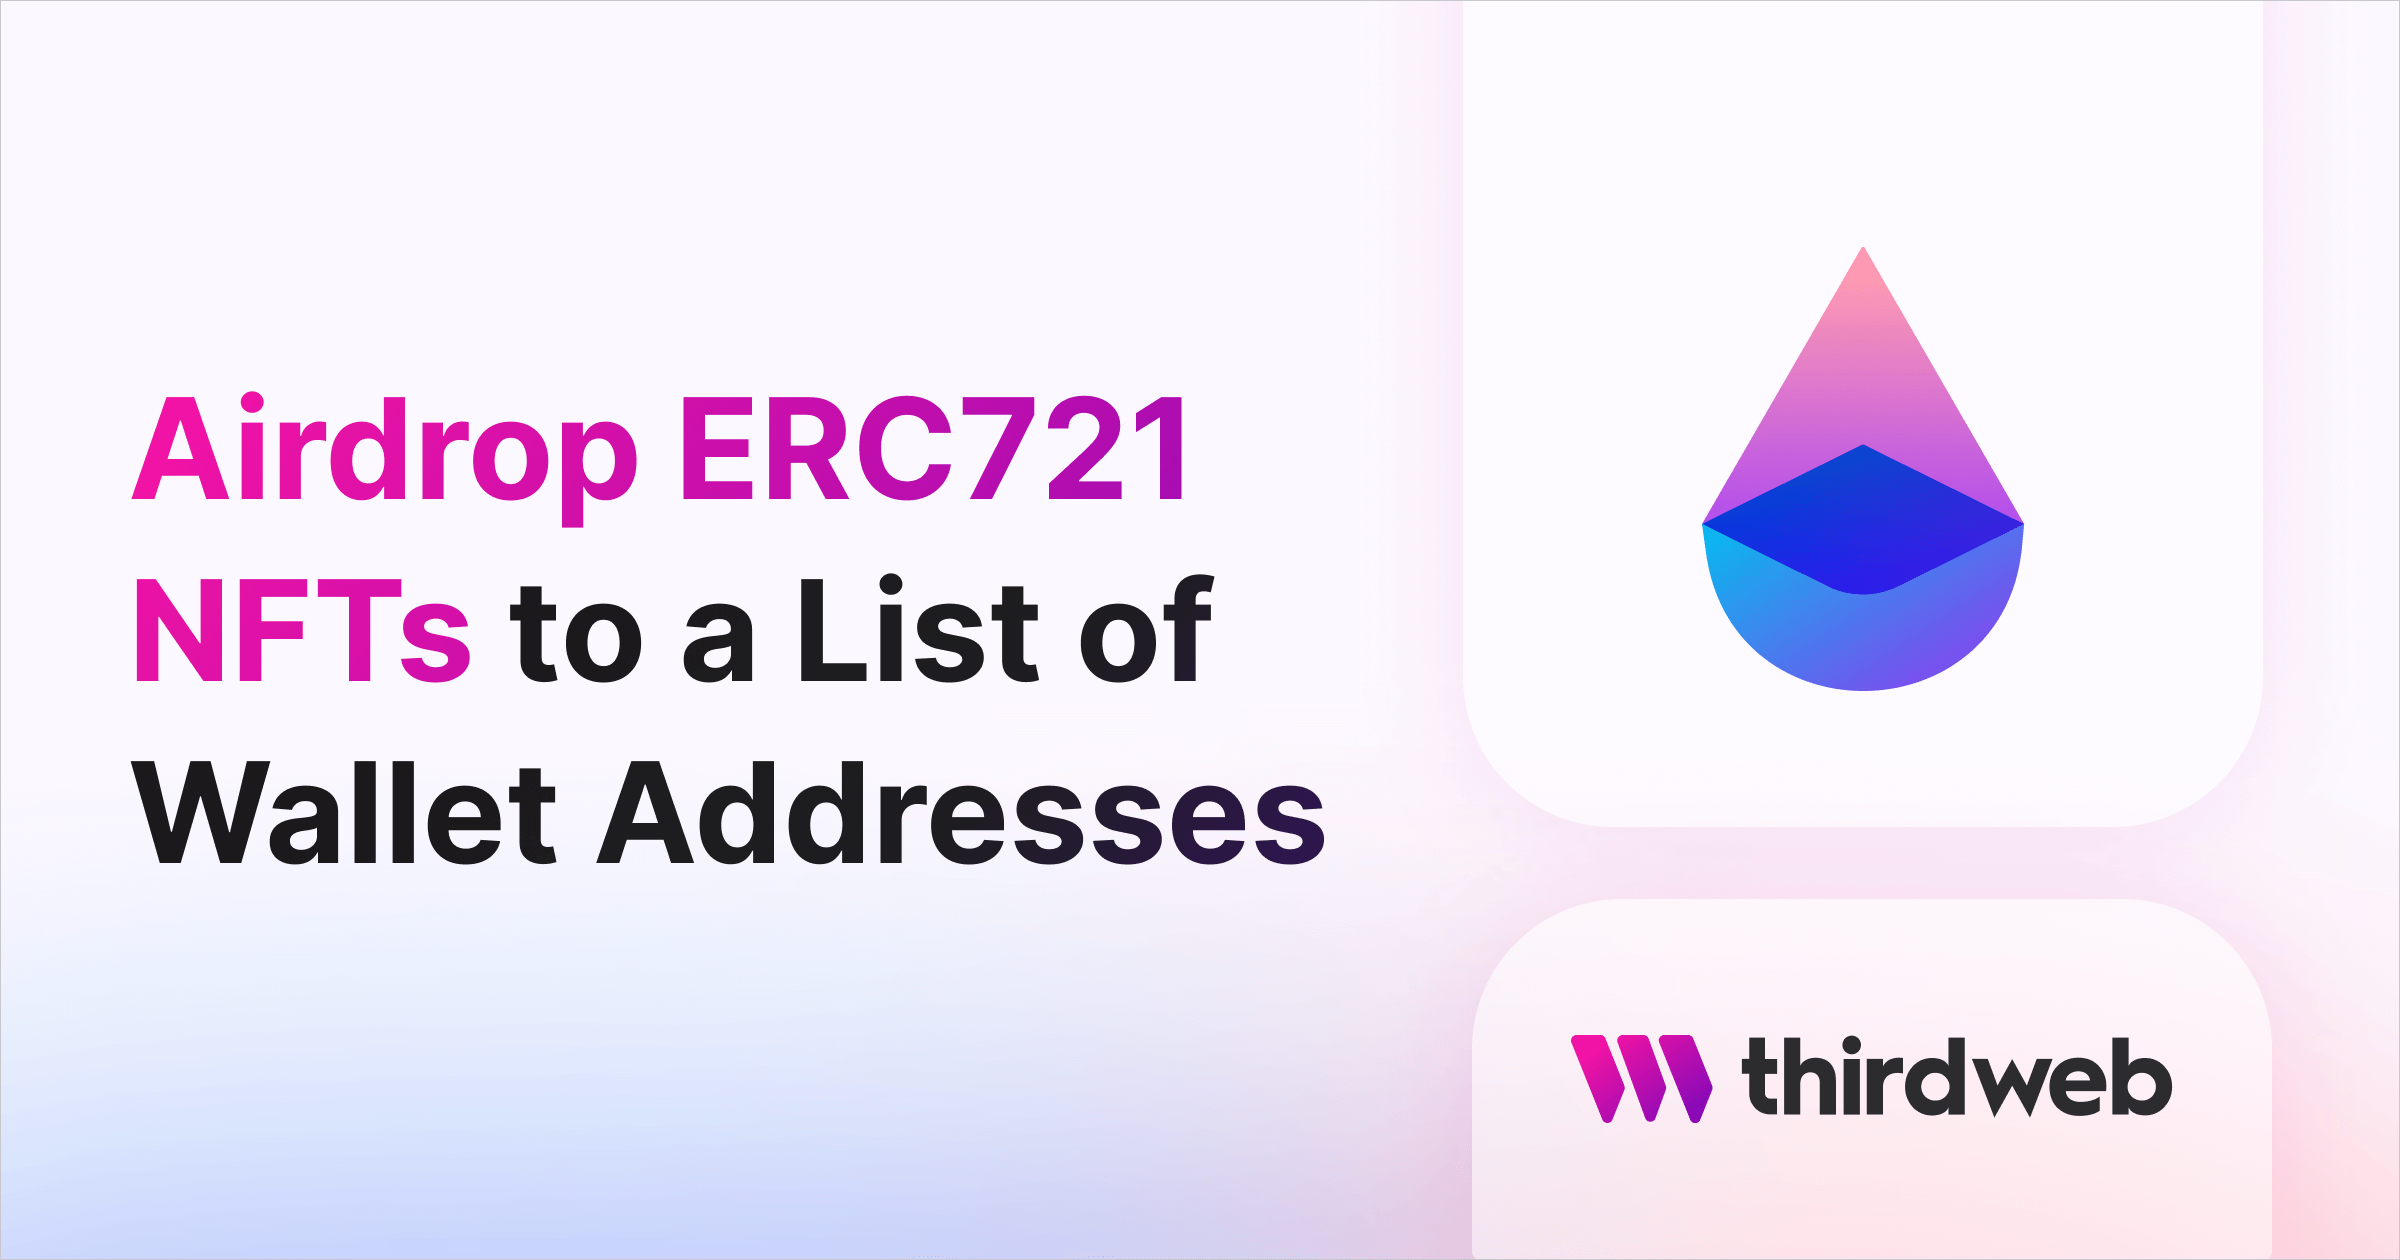 How to Airdrop ERC721 NFTs to a List of Wallet Addresses - thirdweb Guides